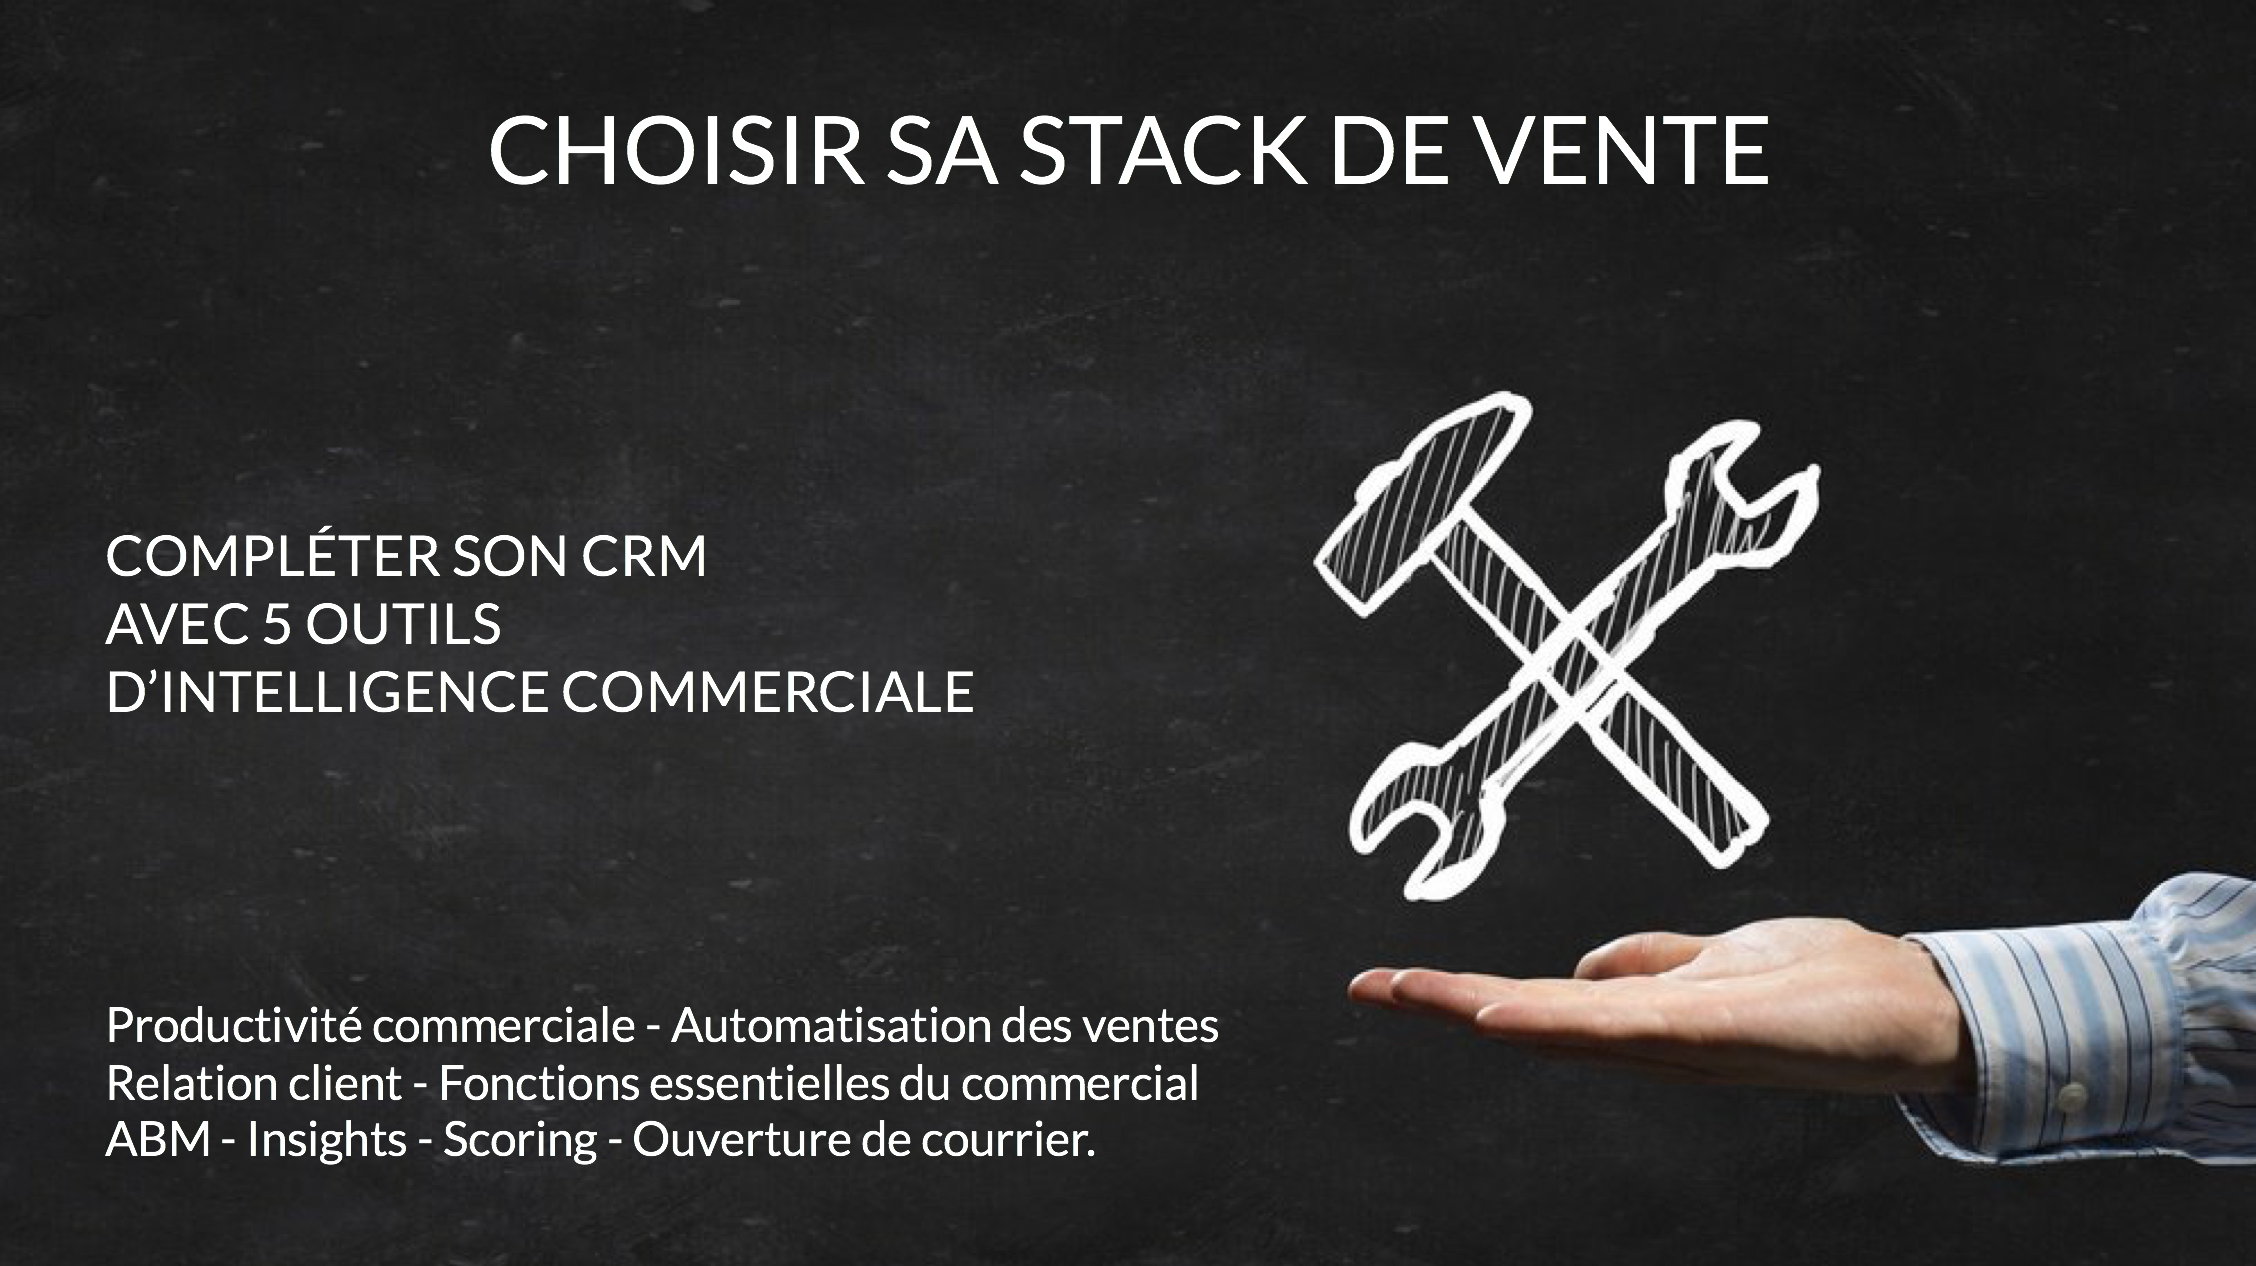 outils intelligence commerciale outils d'intelligence commerciale outils de vente